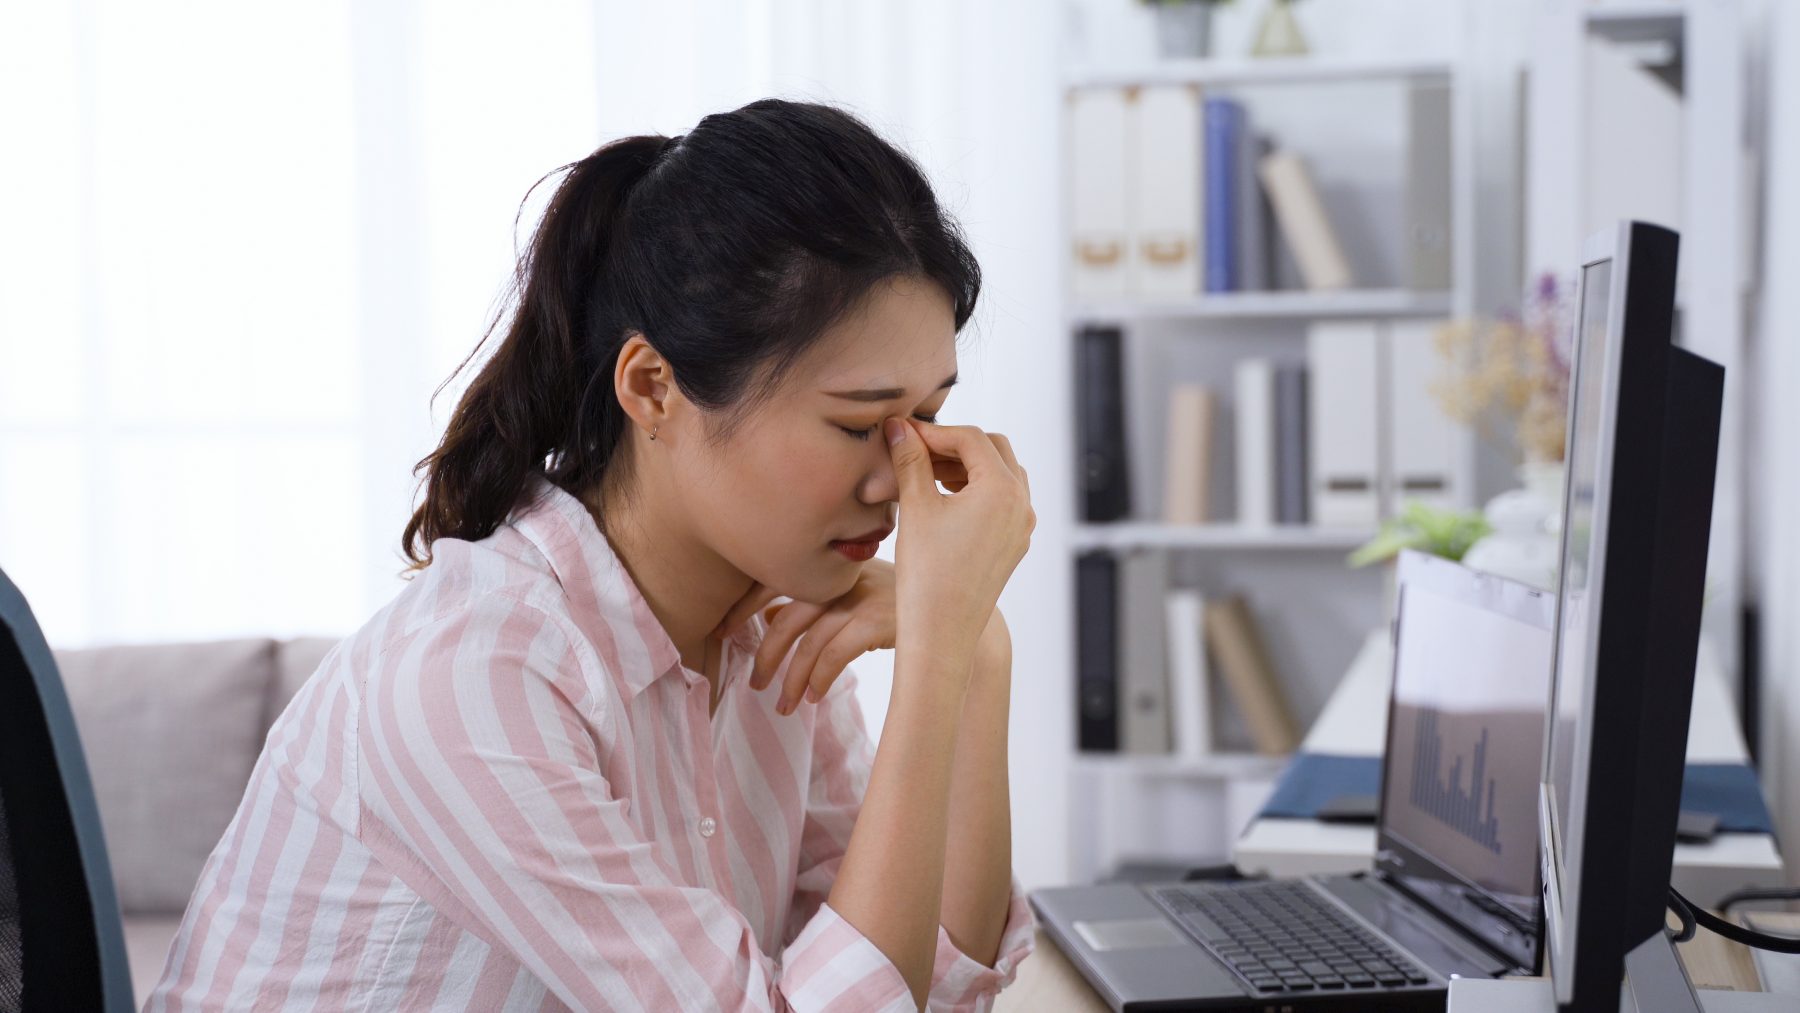 A lady with fatigue caused by staring at a computer screen.